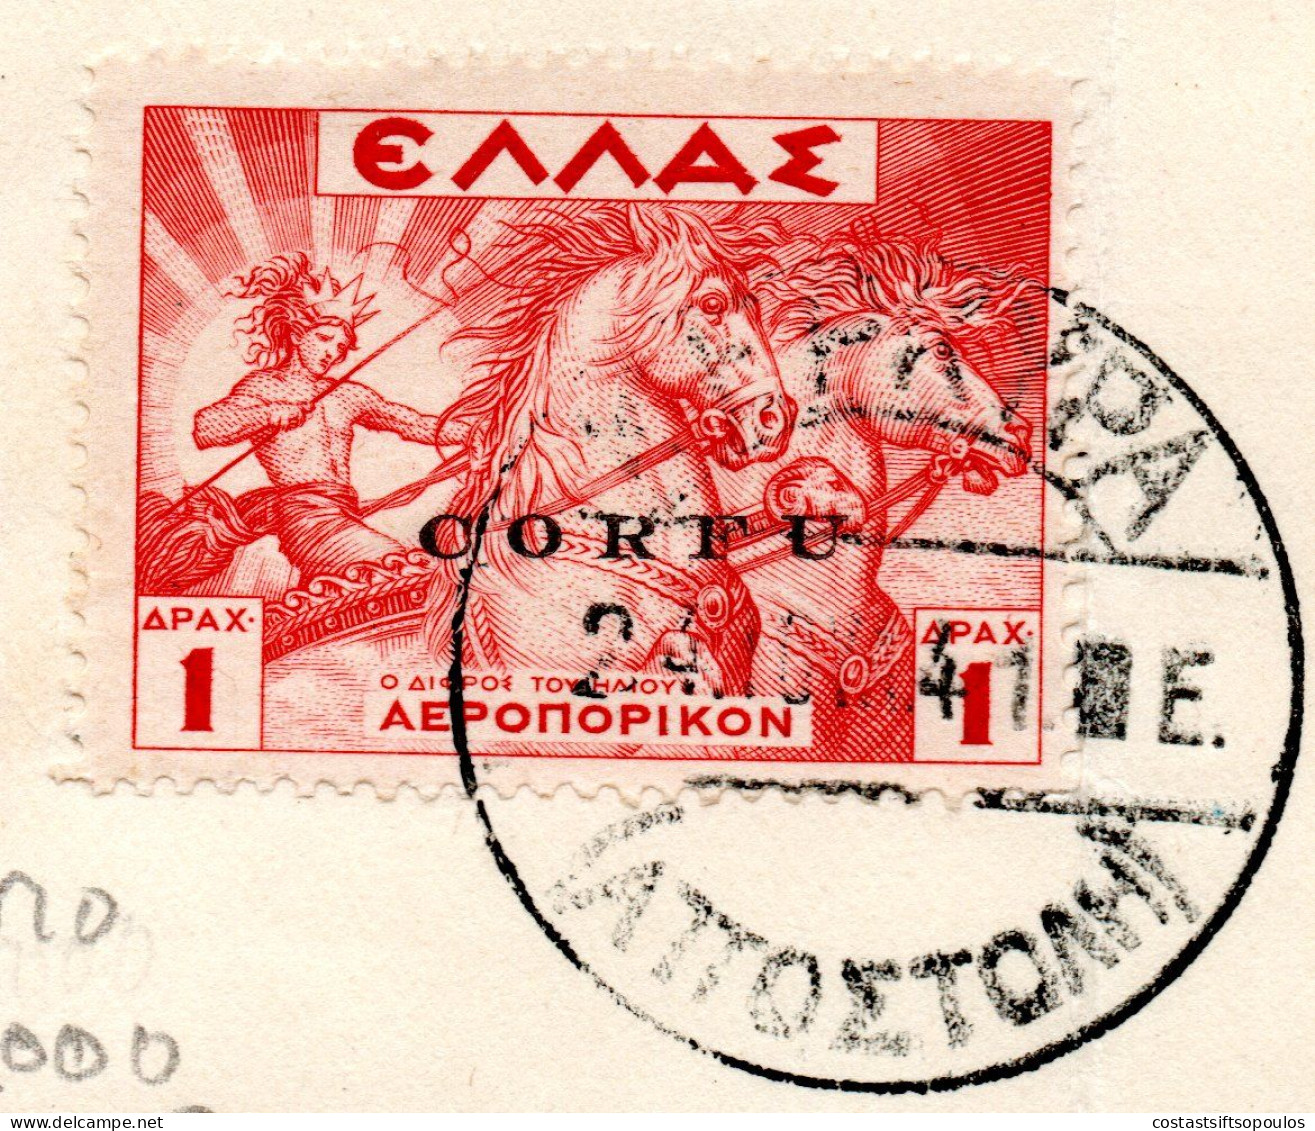 2643..GREECE,ITALY,IONIAN,CORFU,1941 AIRPOST HELLAS 20-31(-29 100 DR.}ON PAPER, CERTIFIED 15/8/41,13 SCANS - Islas Ionian